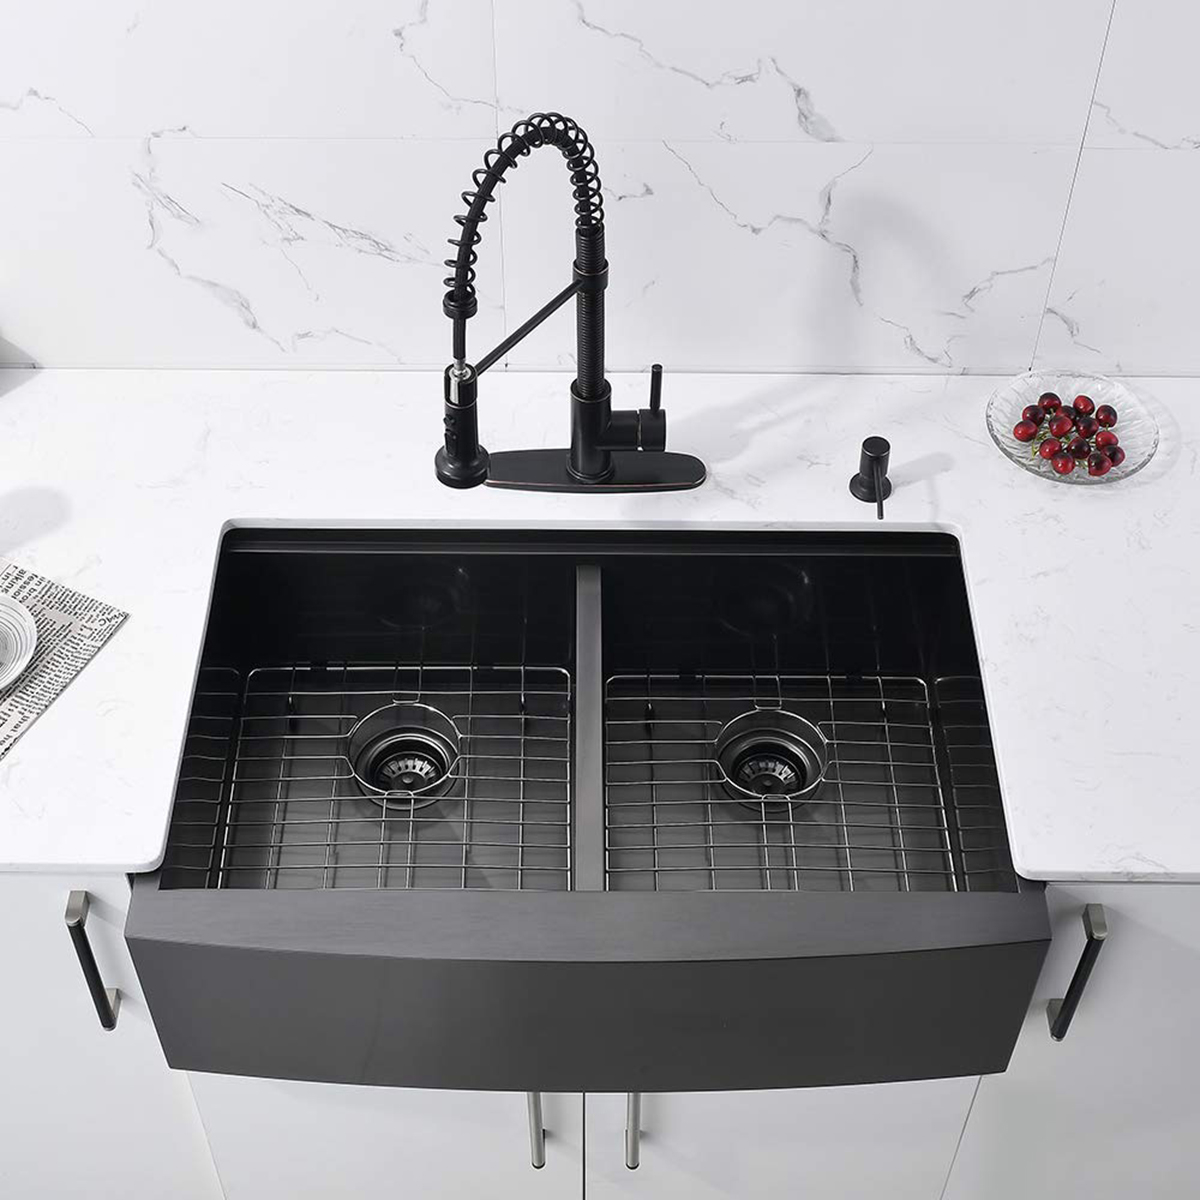 Factory Farmhouse Double Bowl Gunmetal Black Color 304 Stainless Steel Apron Front Handmade Kitchen Sink